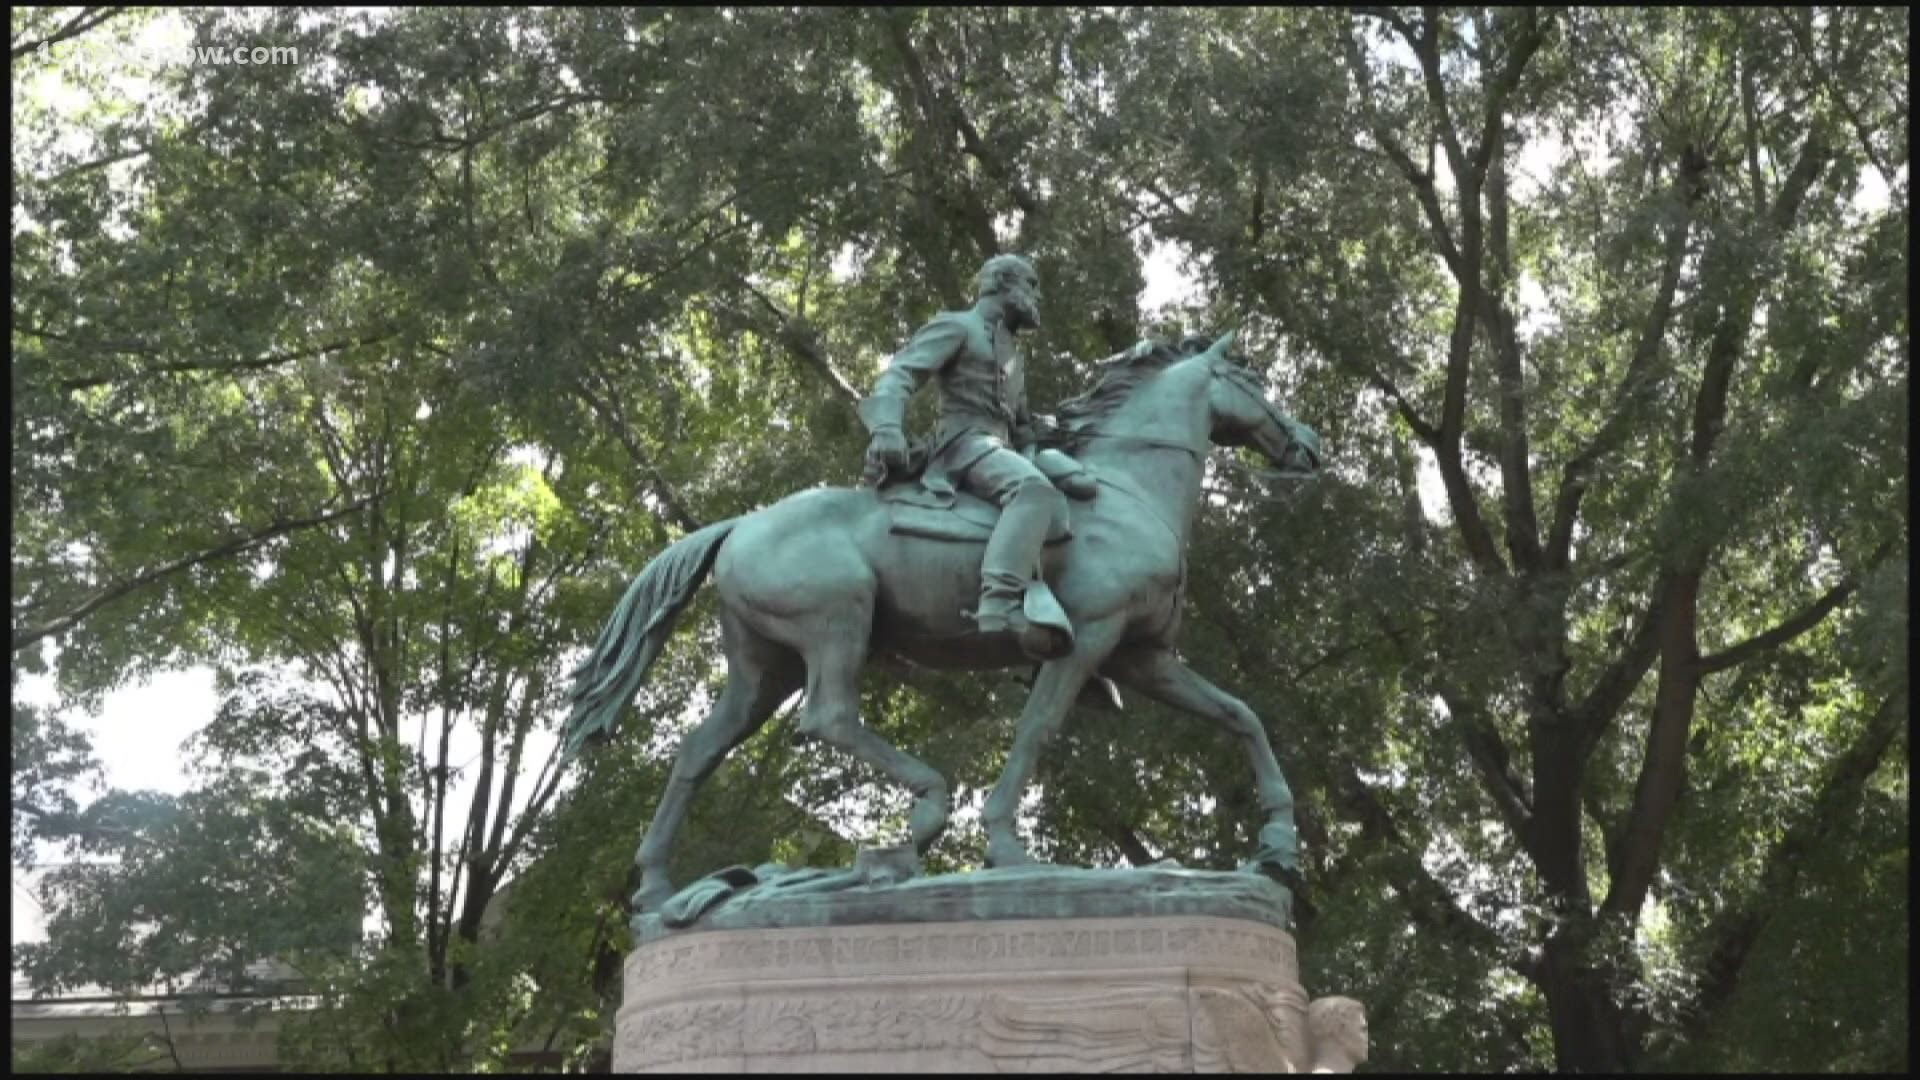 The Robert E. Lee Statue and Stonewall Jackson statue will be removed, but not immediately.